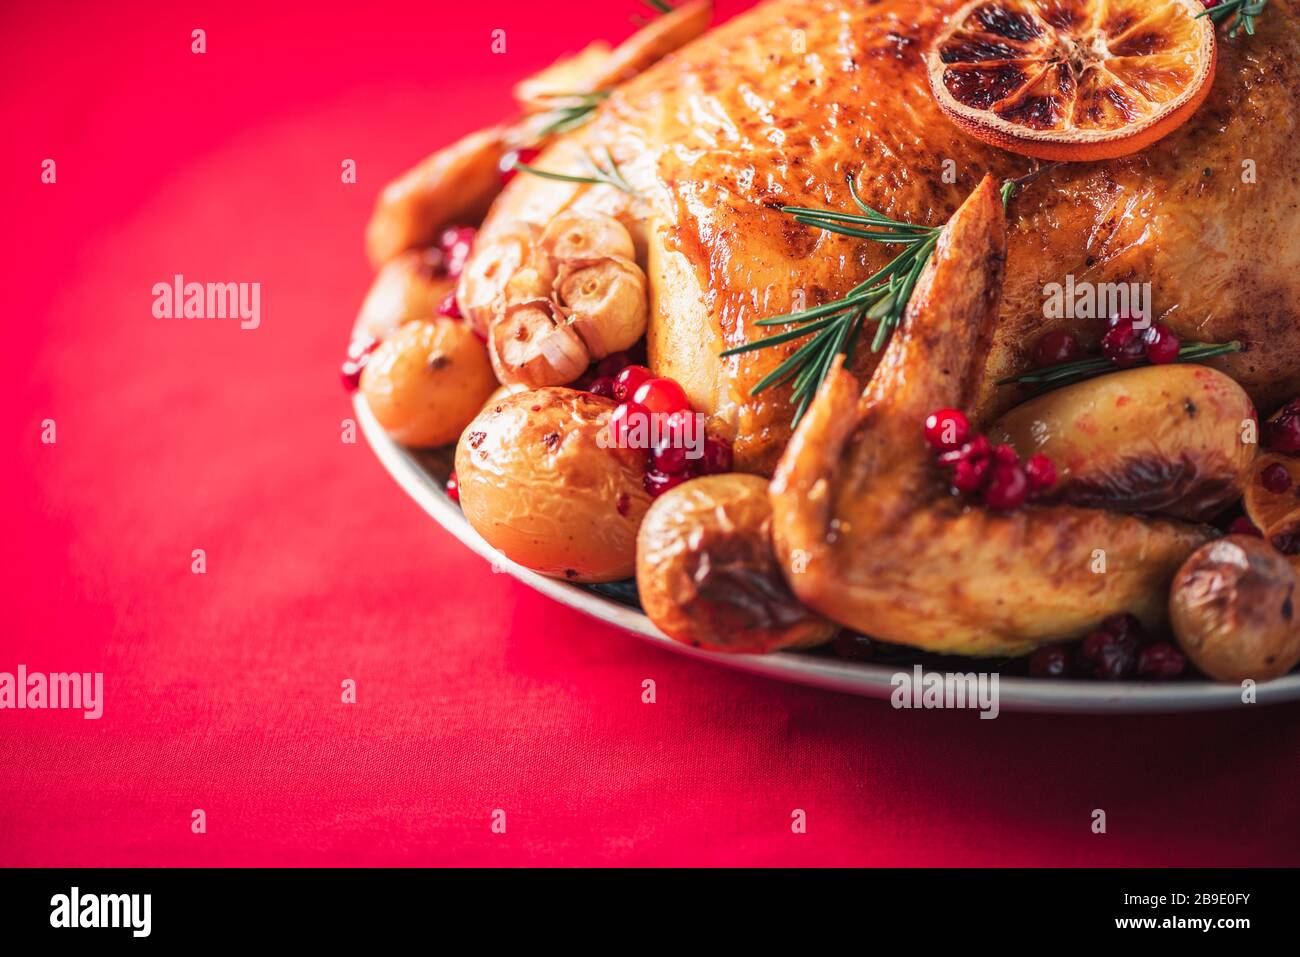 Roasted chicken with oranges, rosemary and cranberries on plate over ...